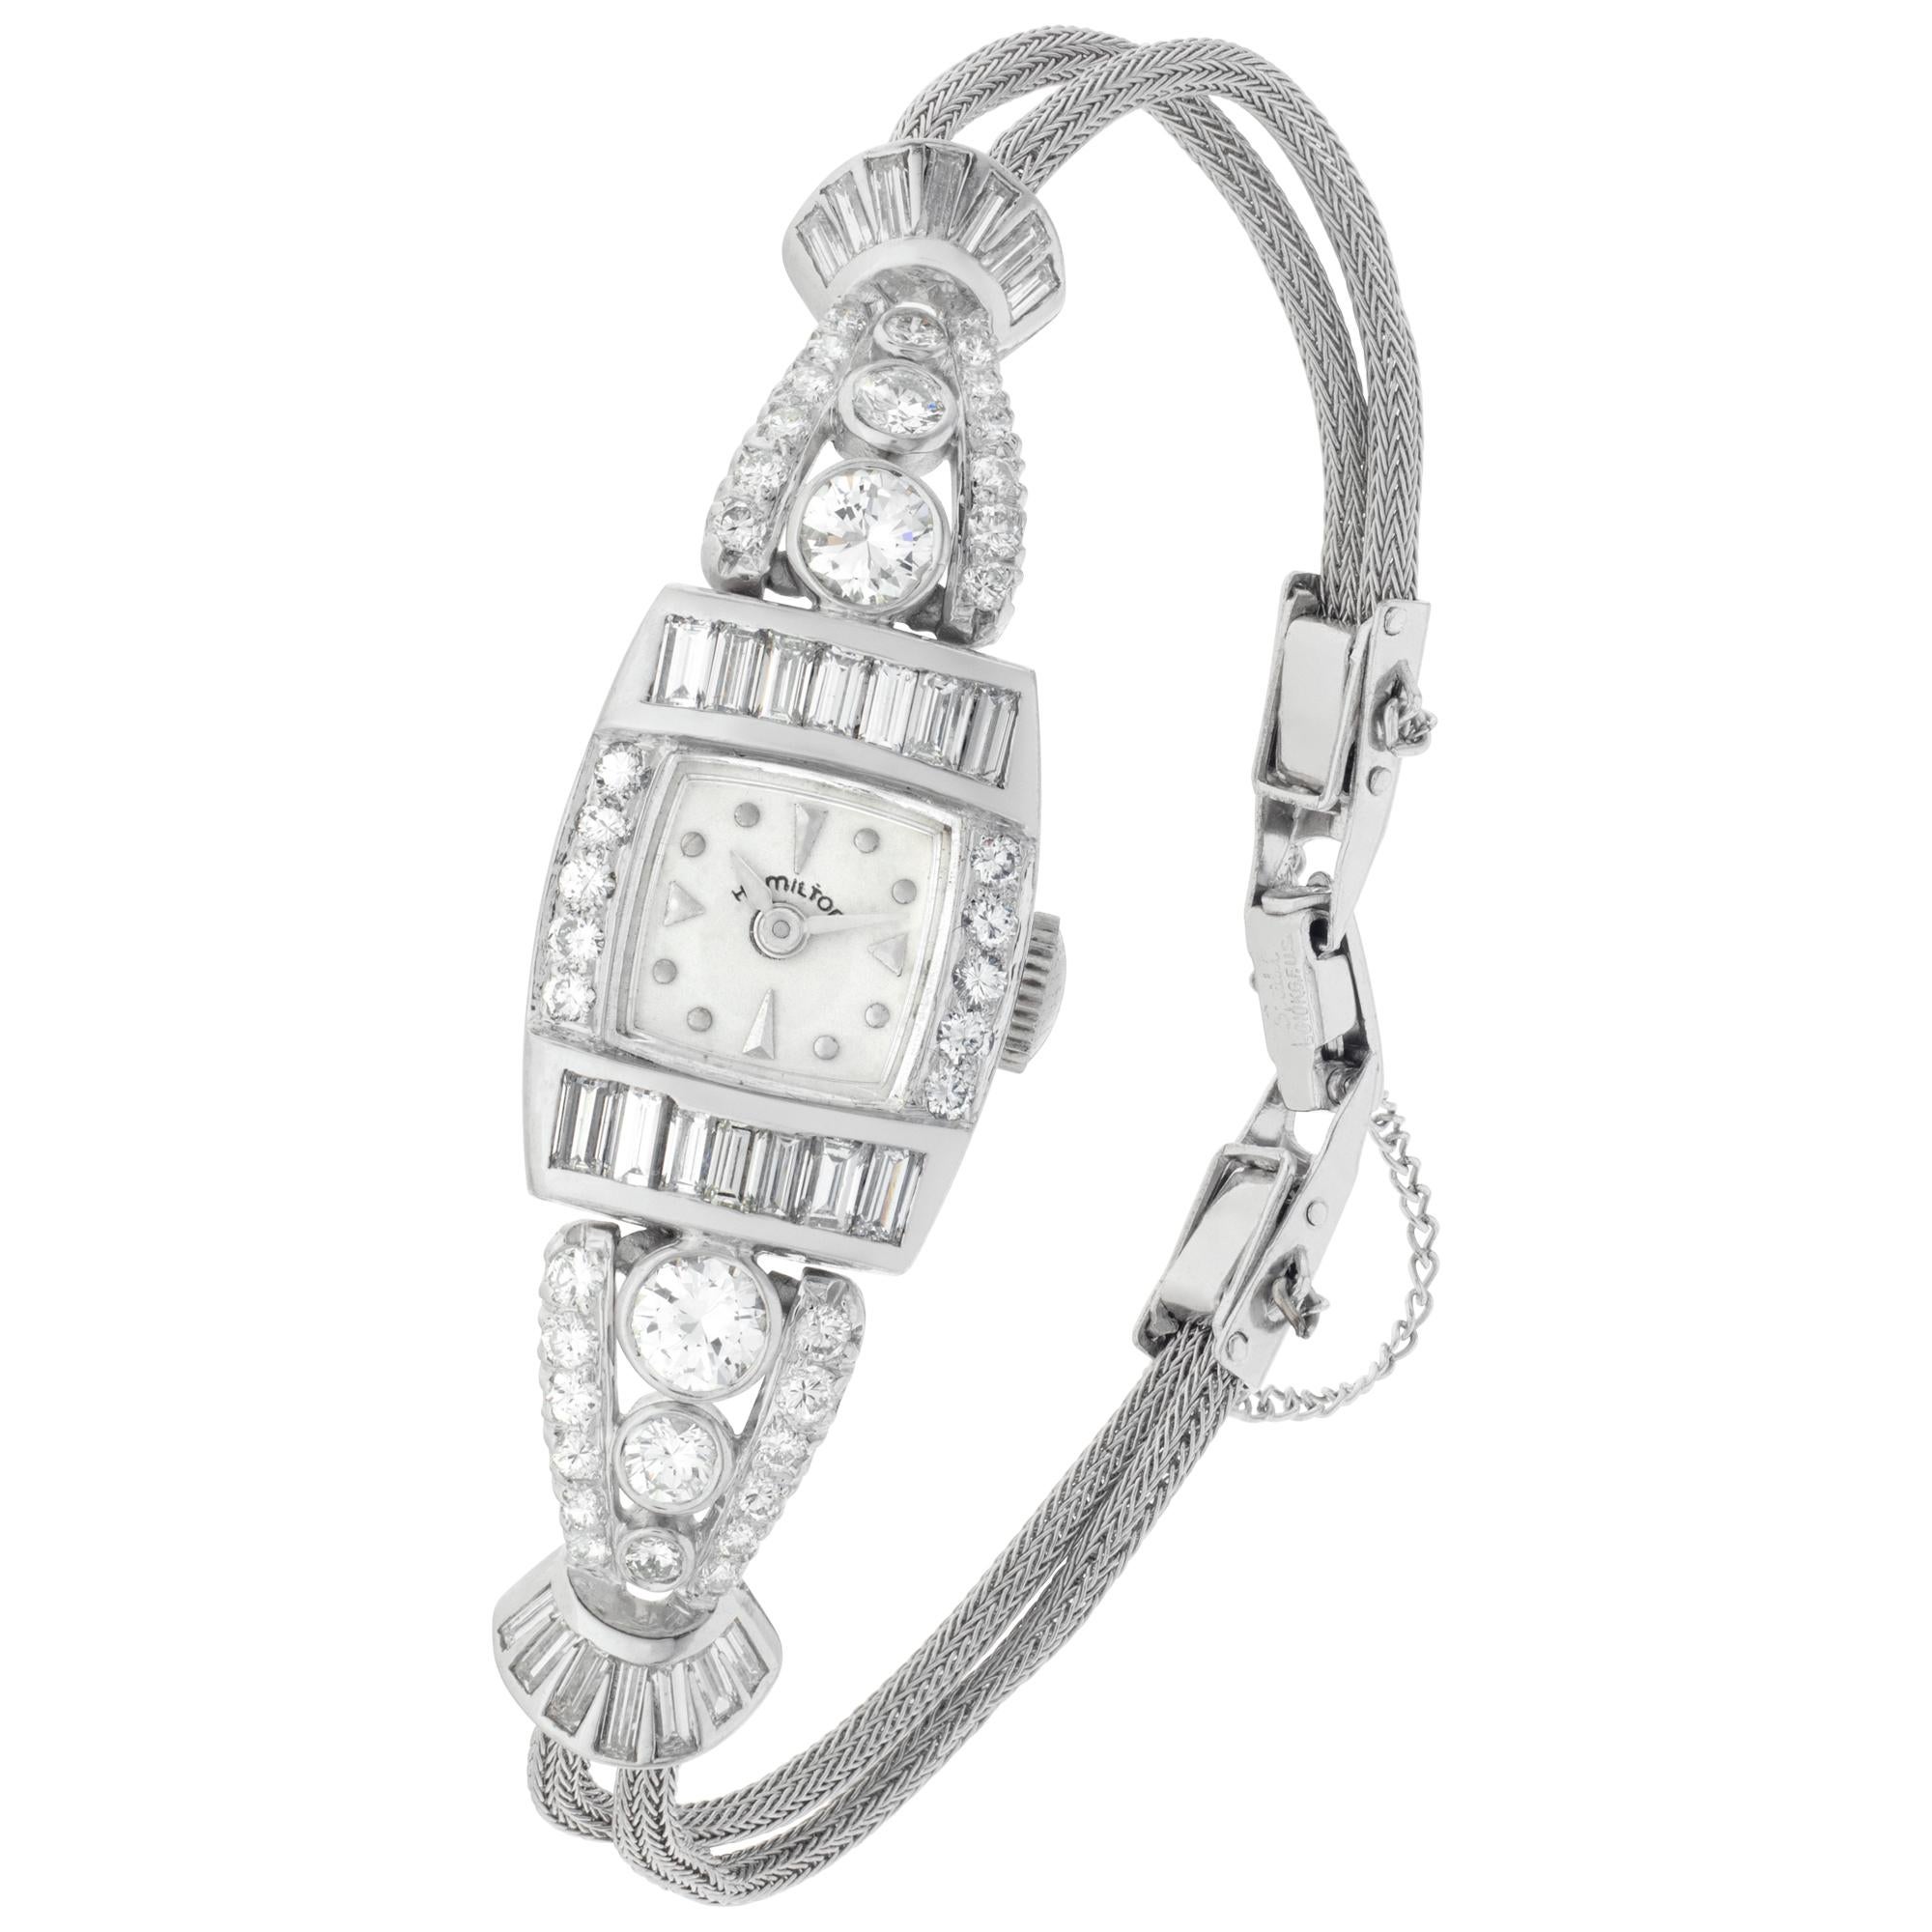 Hamilton diamond Cocktail watch in platinum with approximately 3 carats in G-H color, VS clarity in round and baguette diamonds on gold fill chain bracelet. 22 jewel manual wind movement. 14.5 mm case size. Circa 1950s. Fine Pre-owned Hamilton